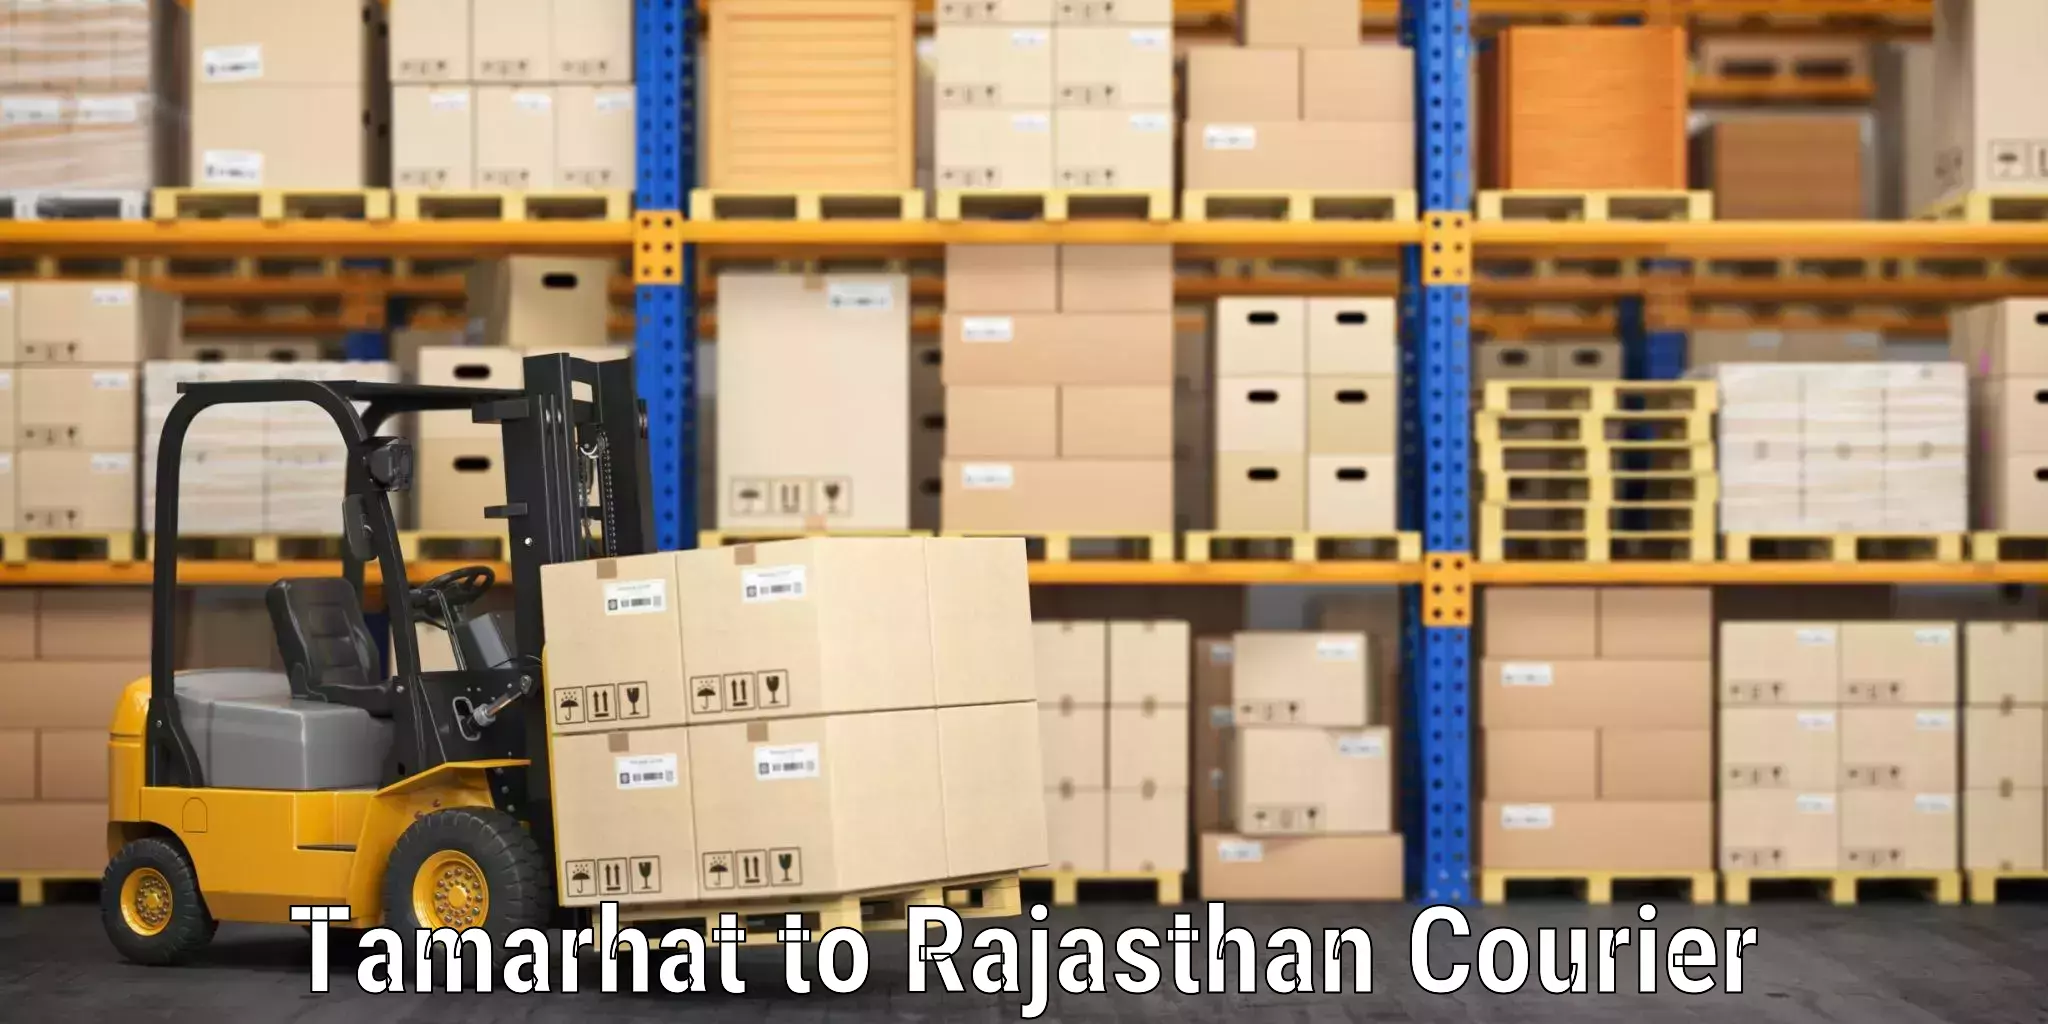 Luggage shipment specialists Tamarhat to Suratgarh